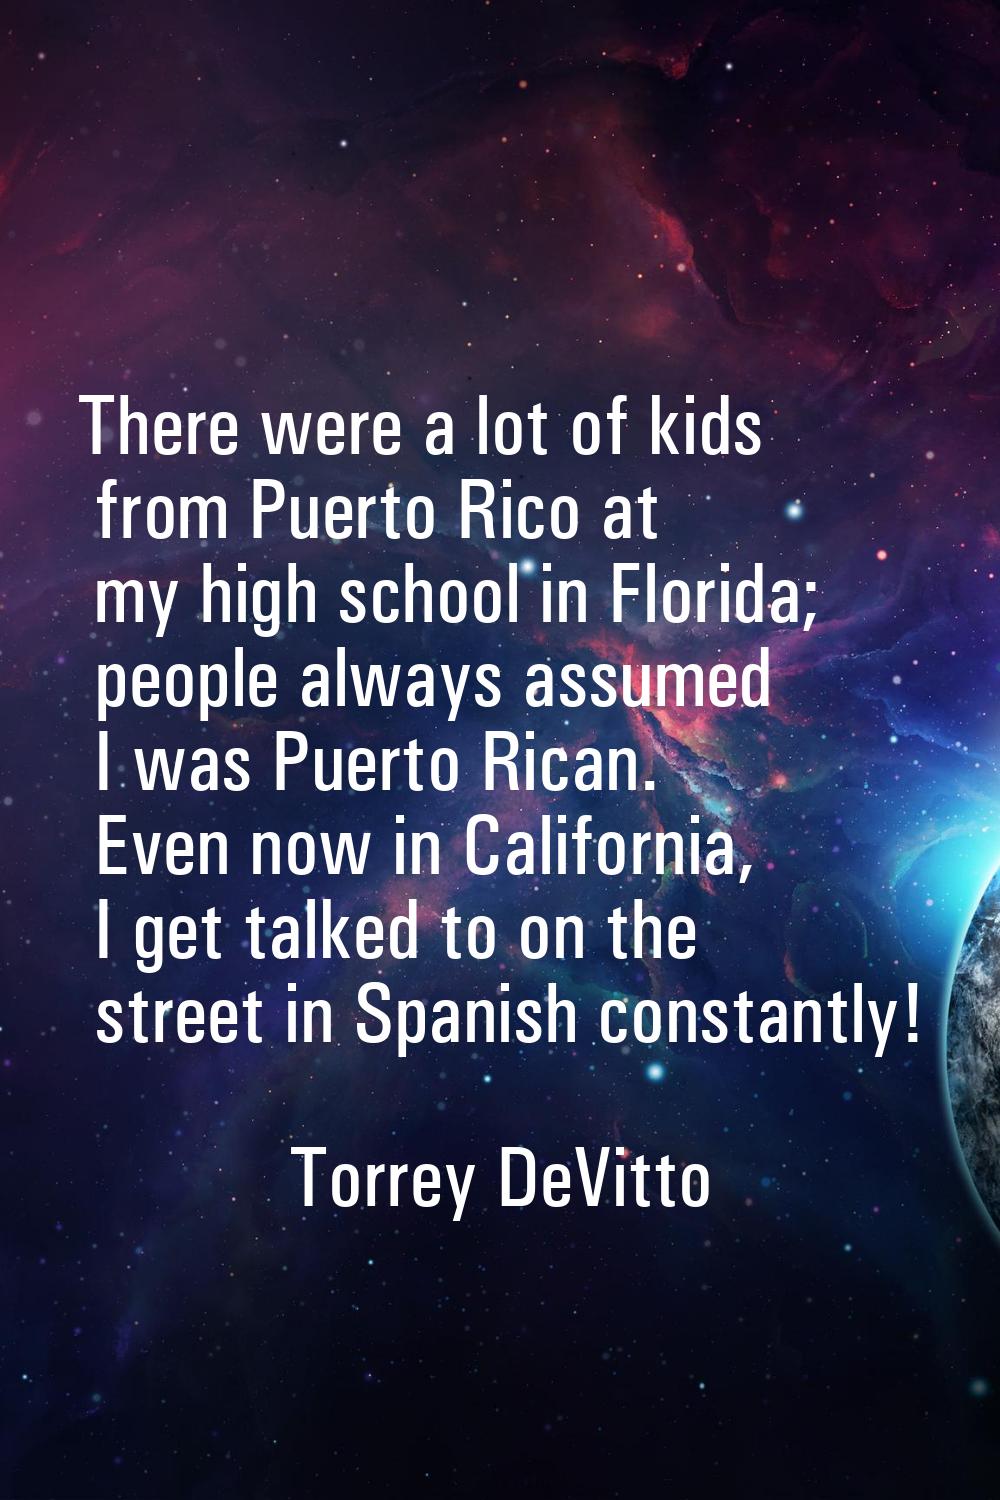 There were a lot of kids from Puerto Rico at my high school in Florida; people always assumed I was